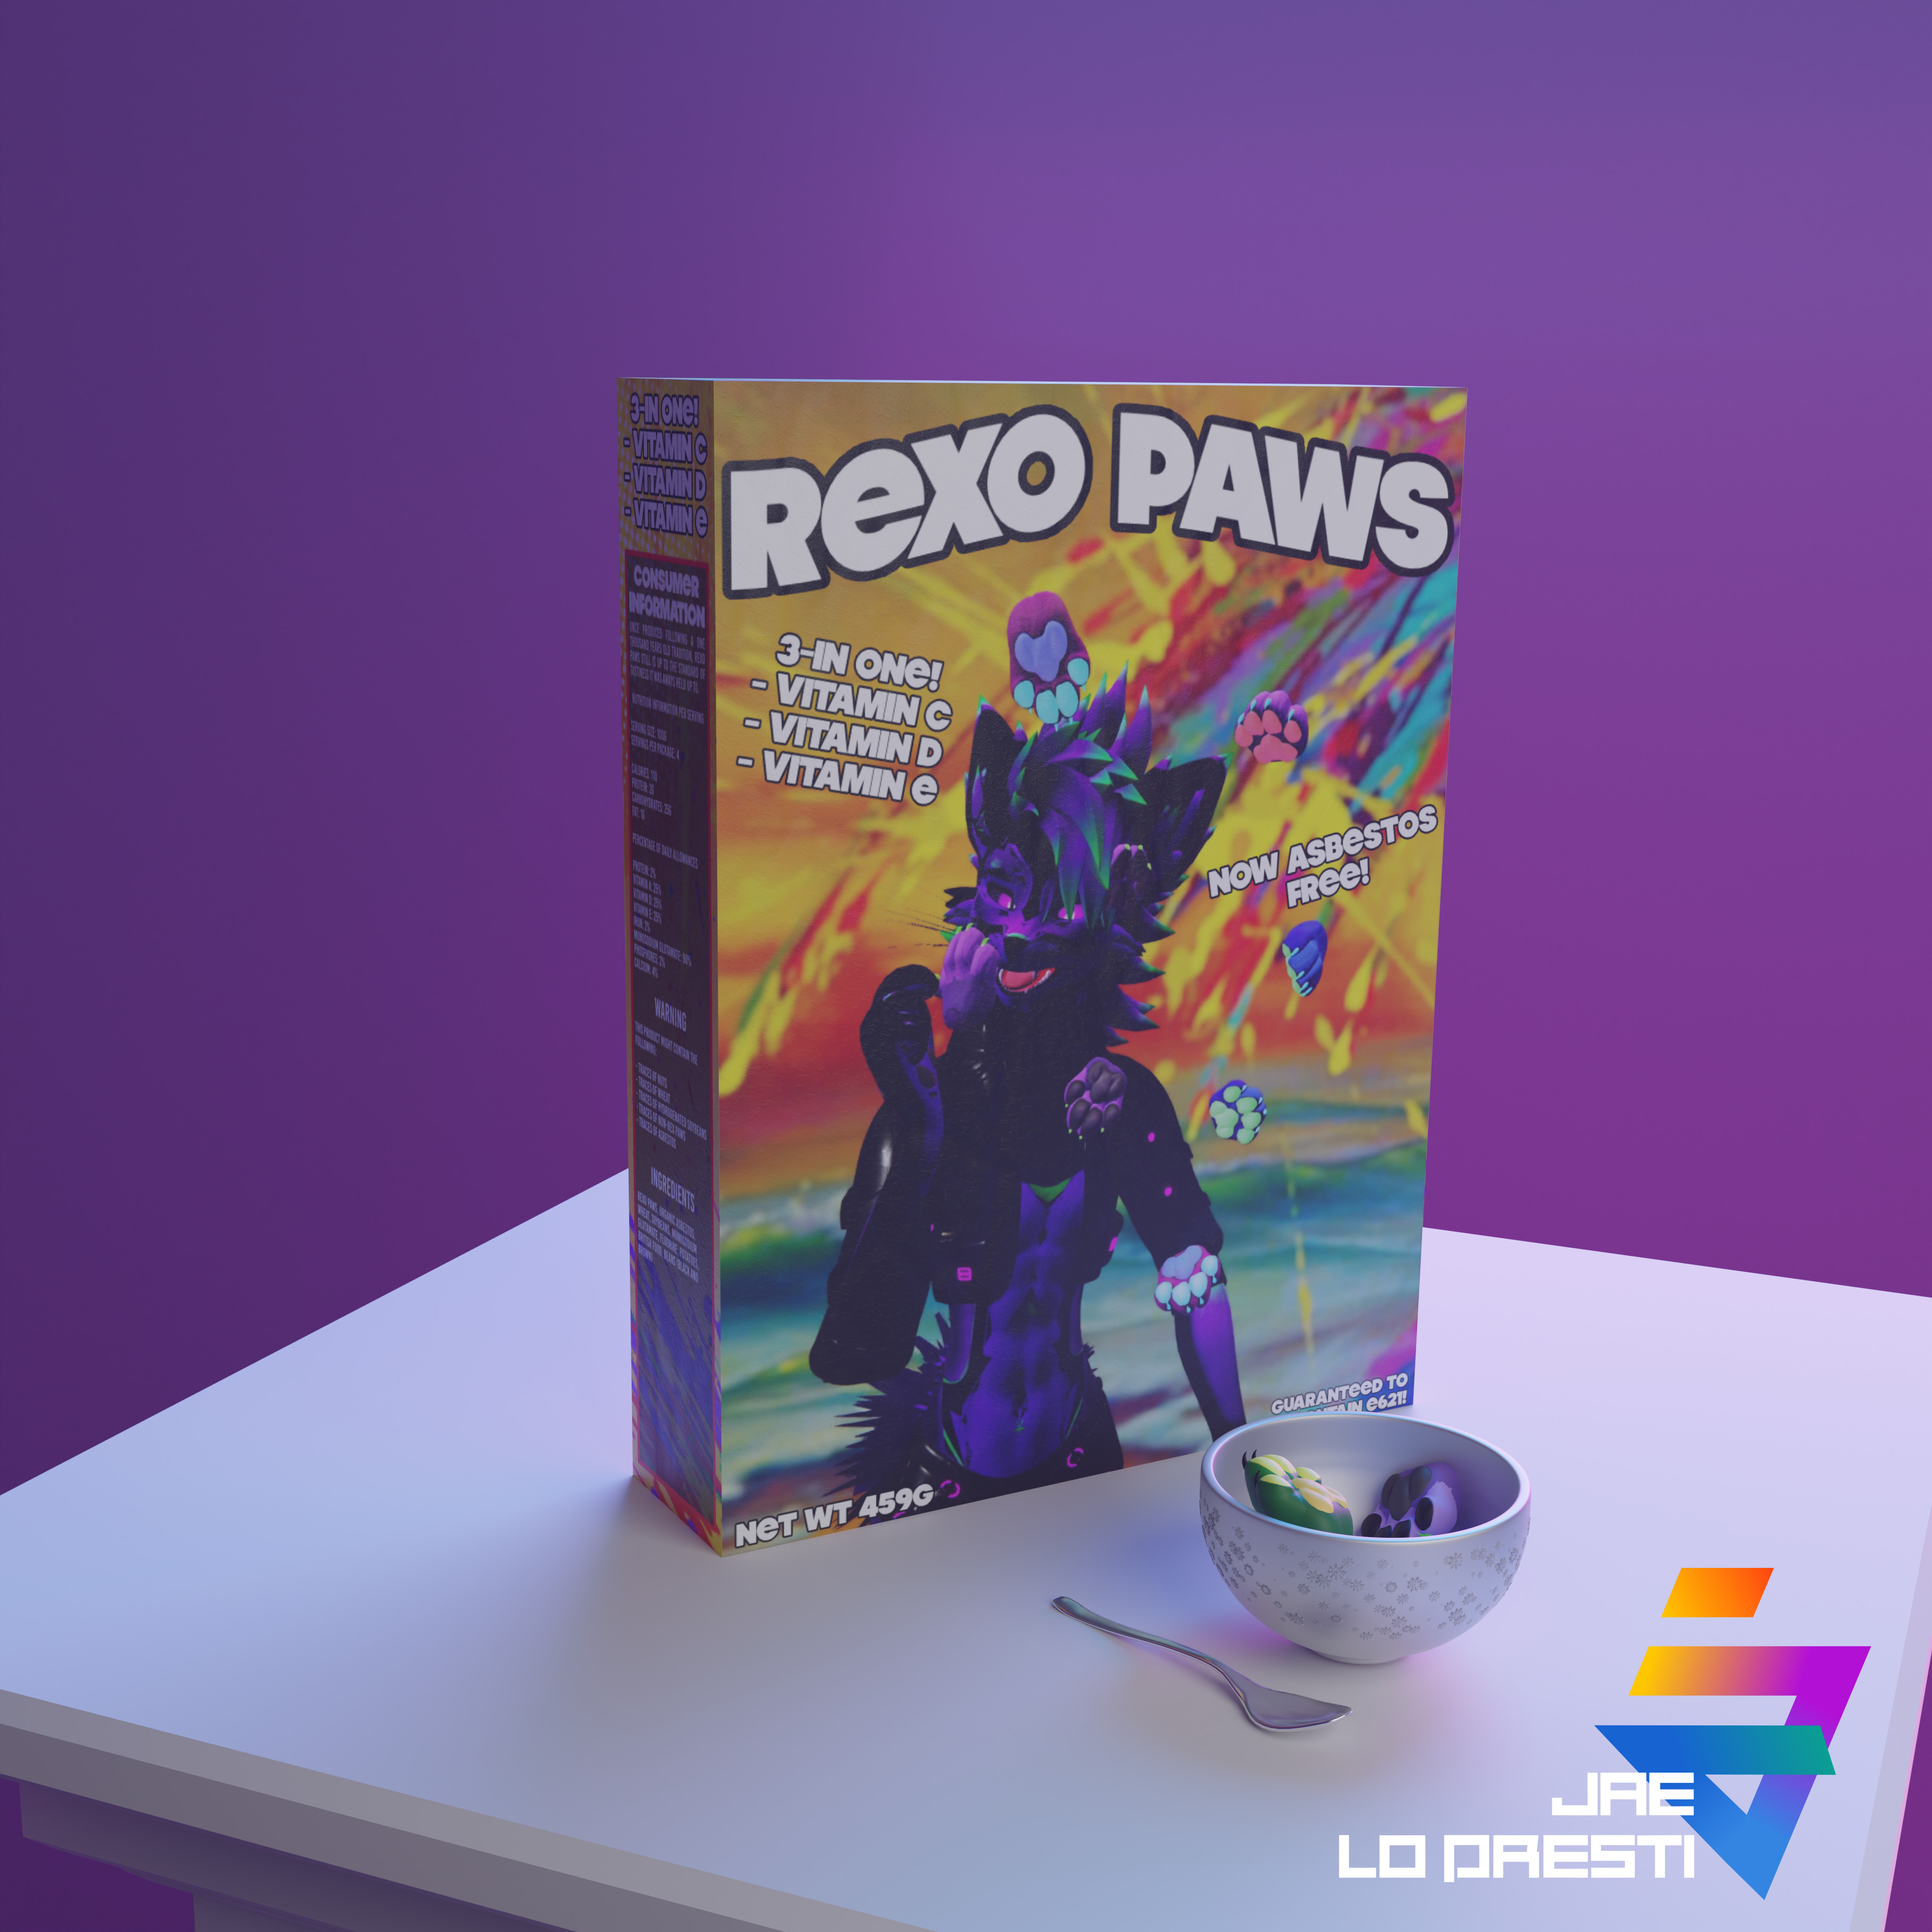 Rendered box of cereals called Rexo Paws.